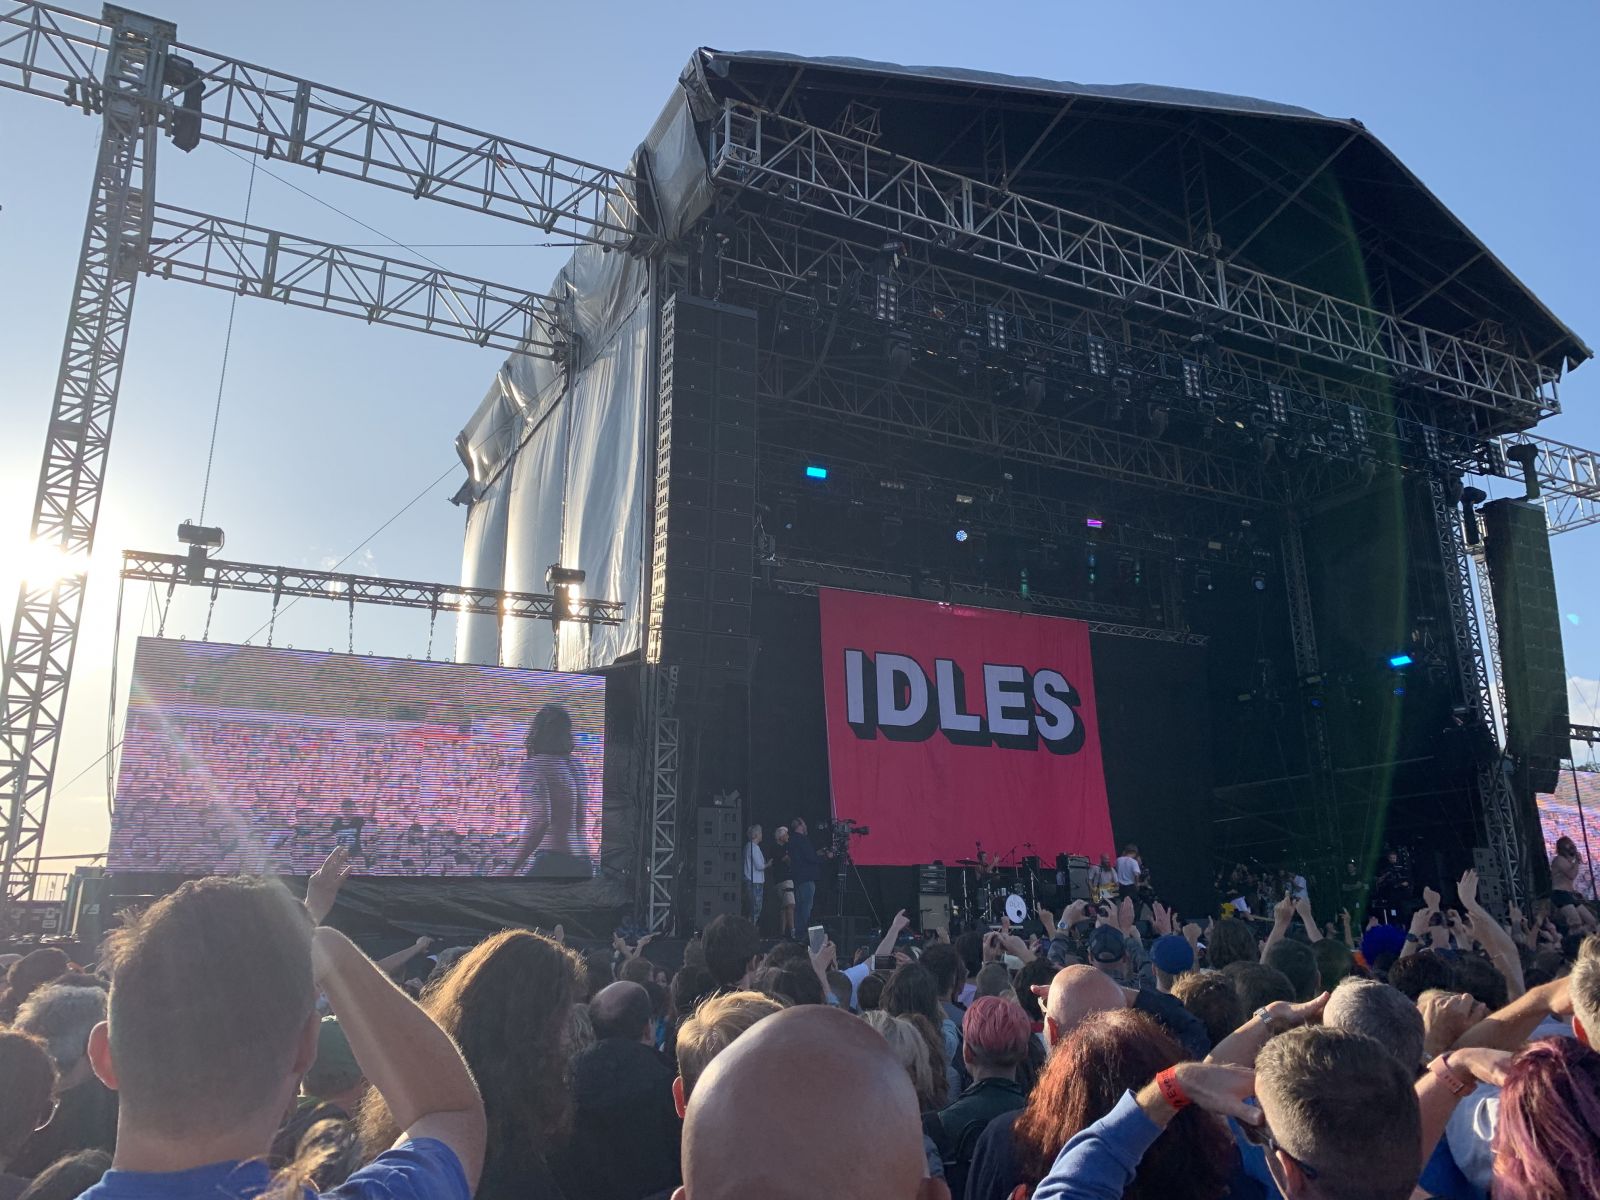 IDLES played the Main Stage at this year’s Downs festival